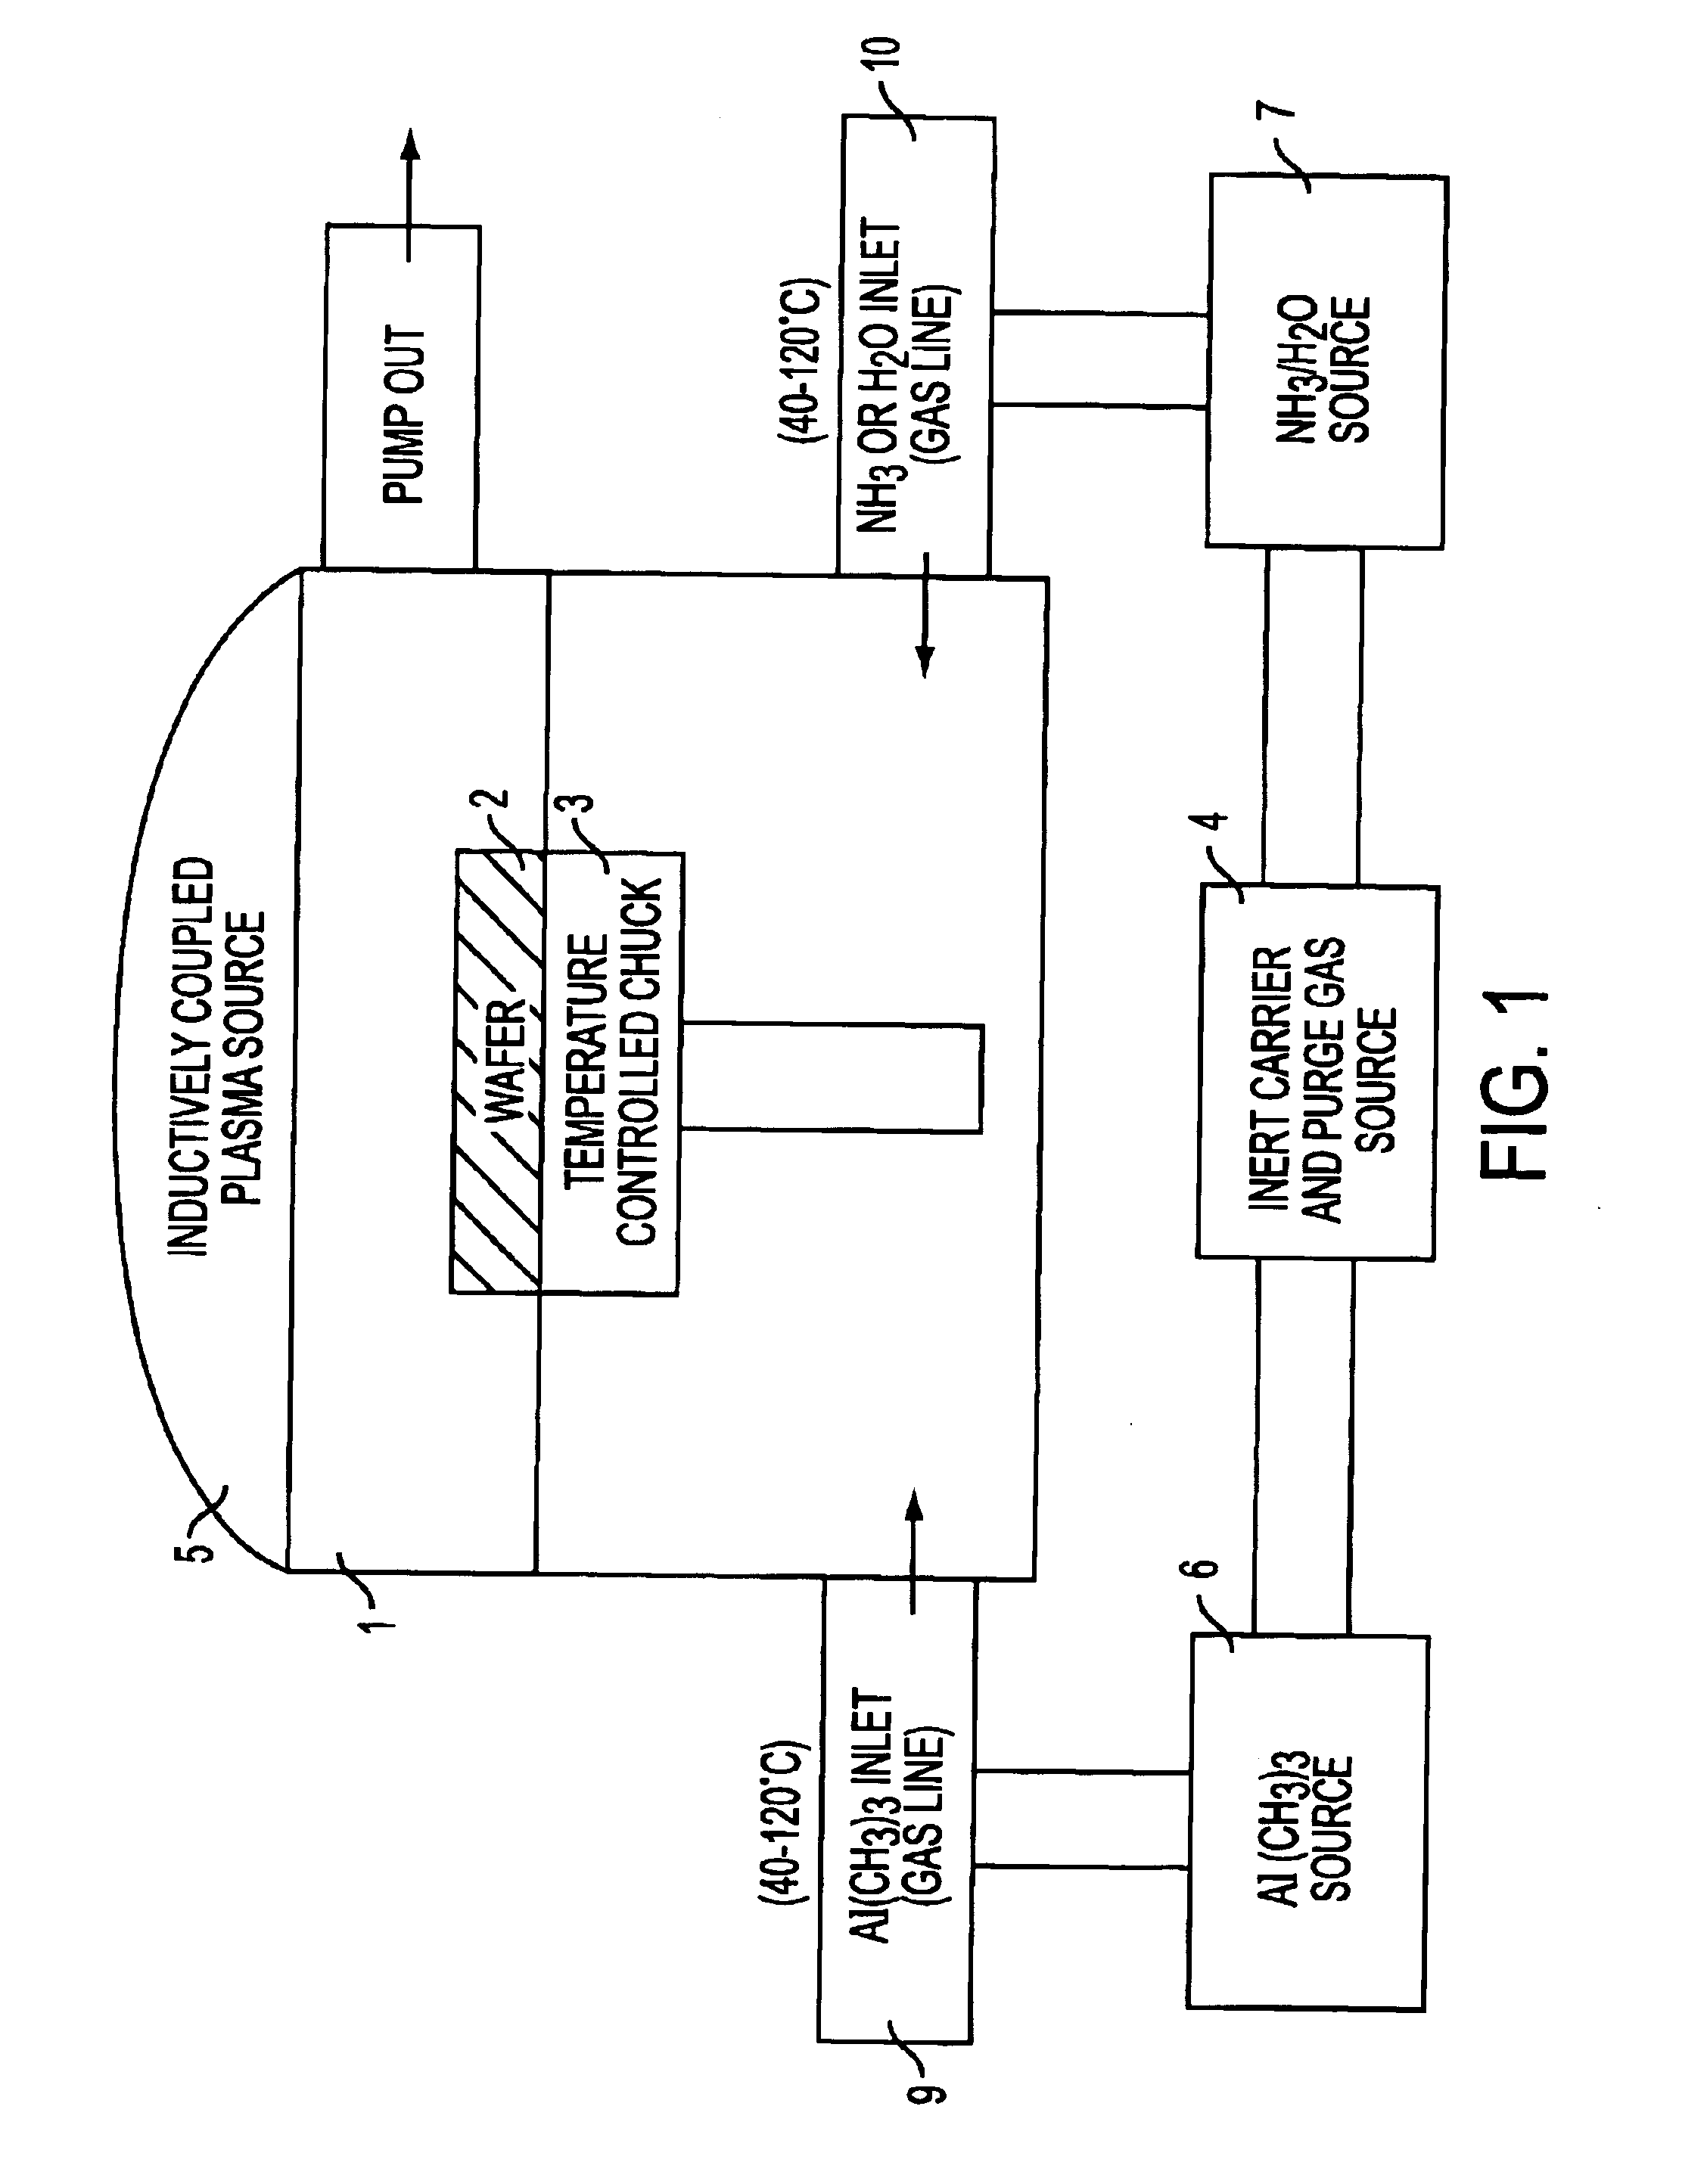 Multilayer dielectric tunnel barrier used in magnetic tunnel junction devices, and its method of fabrication